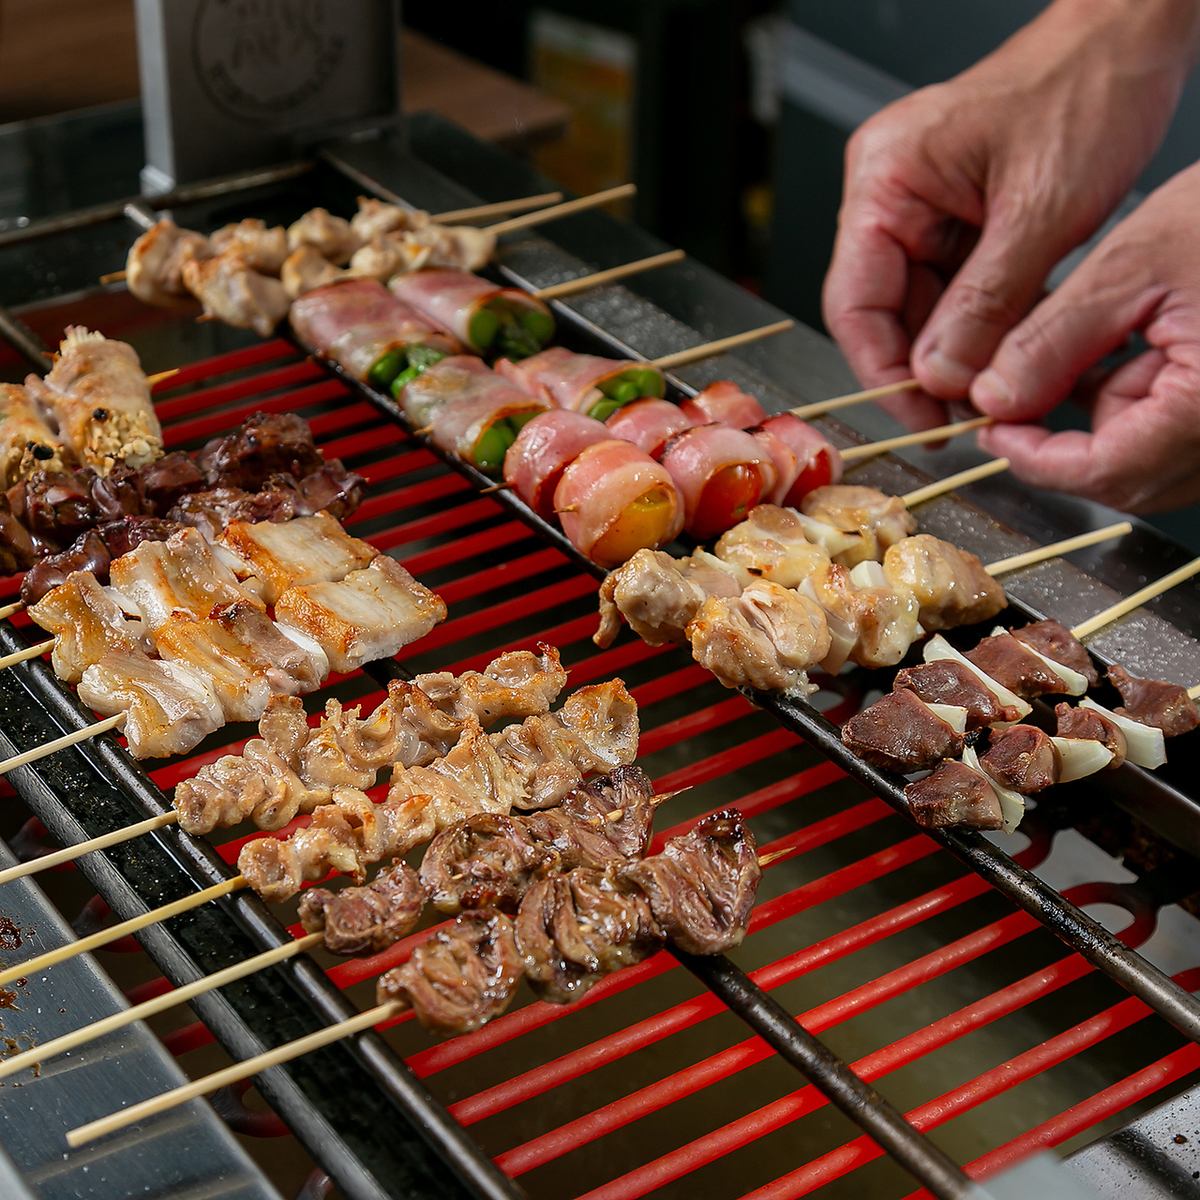 ≪Private parties OK≫ A bright and welcoming Japanese izakaya with yakitori, seafood, and motsunabe!